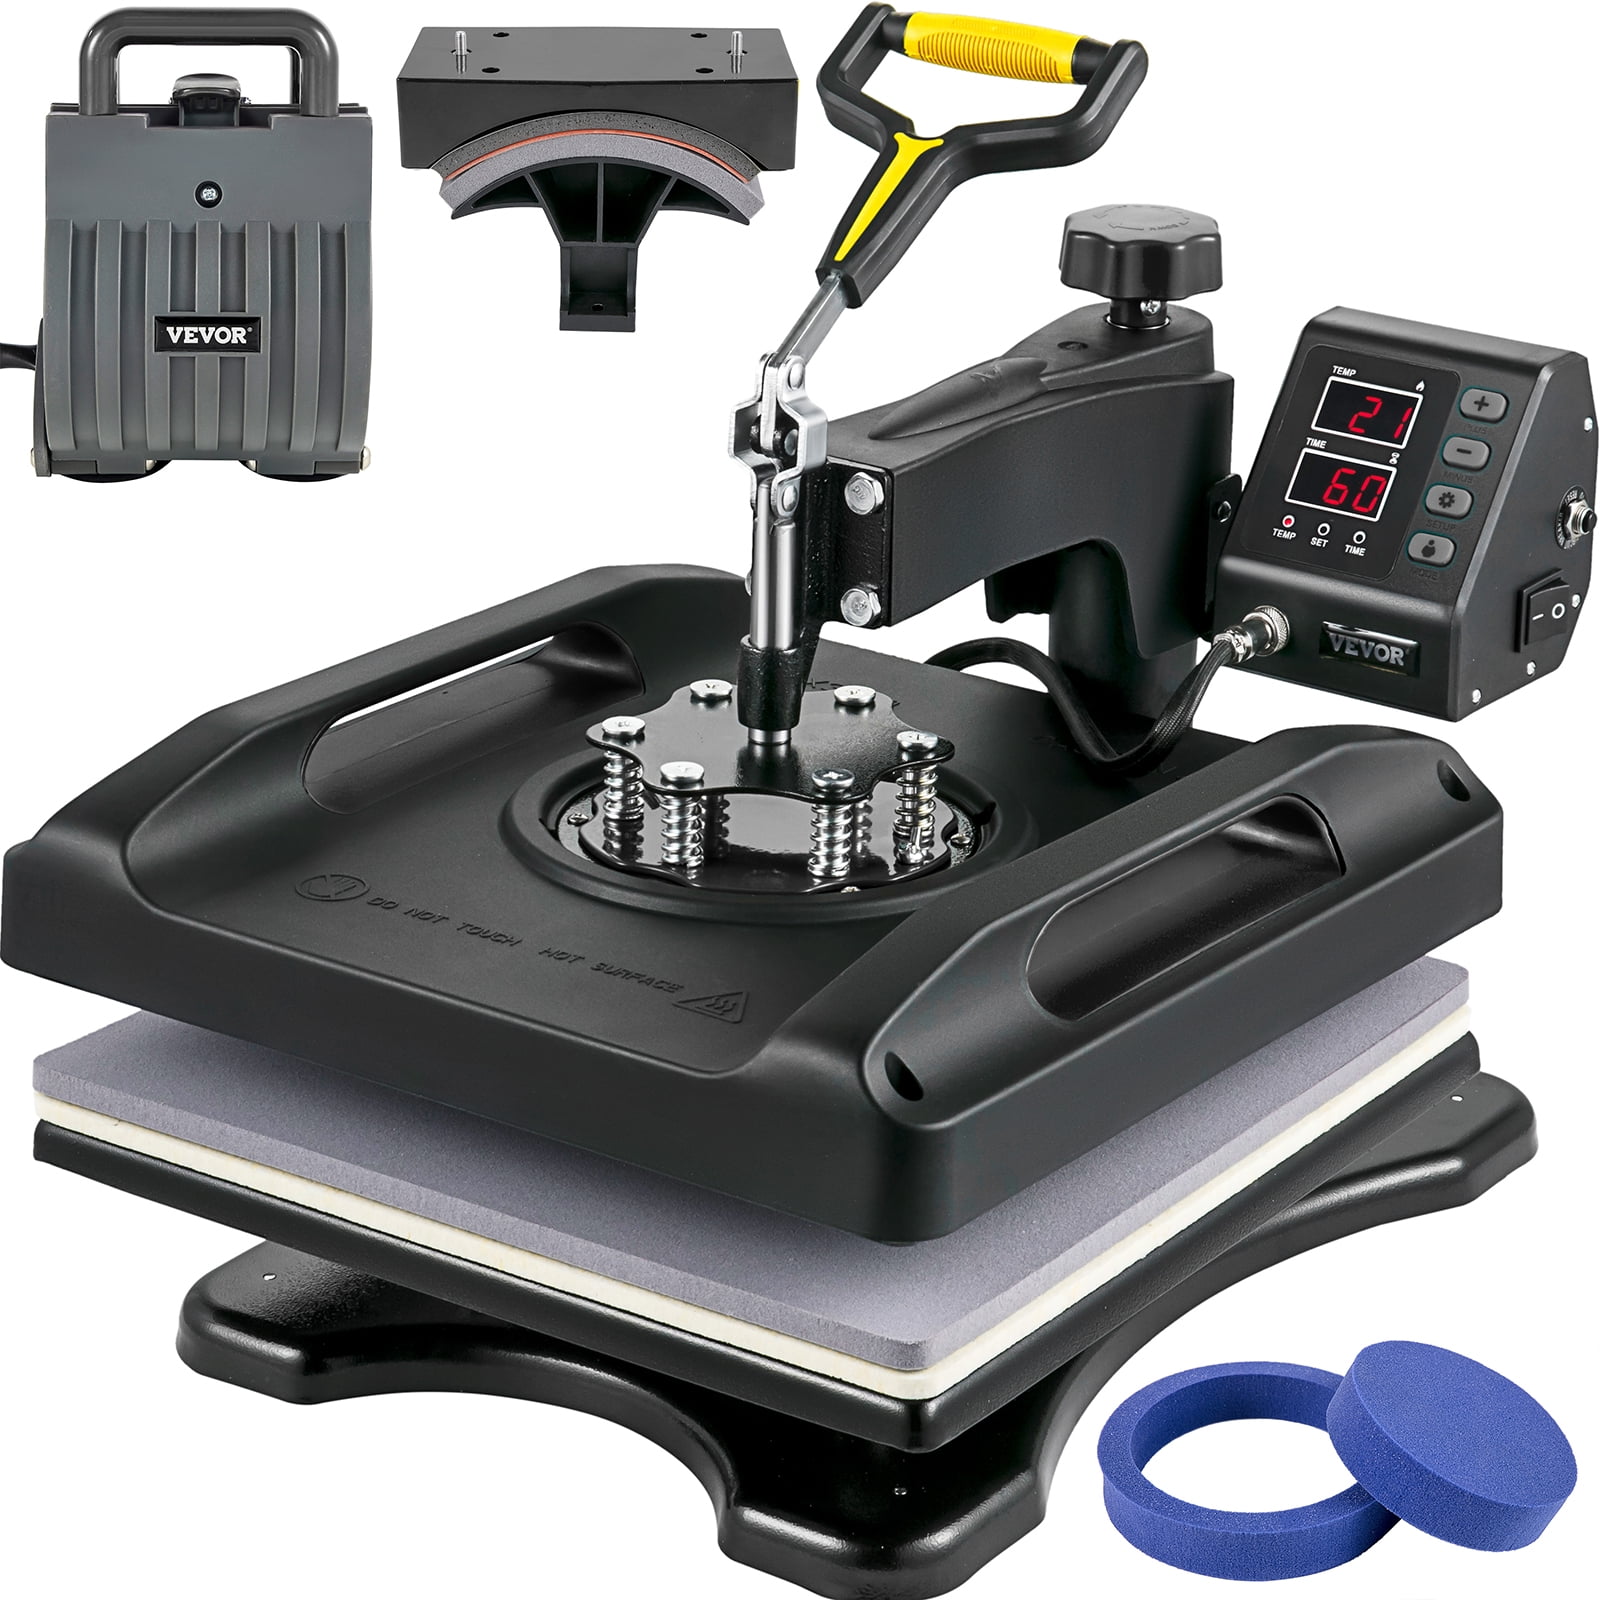 5 In 1 Vision Media Combo Heat Press Machine at Rs 8000